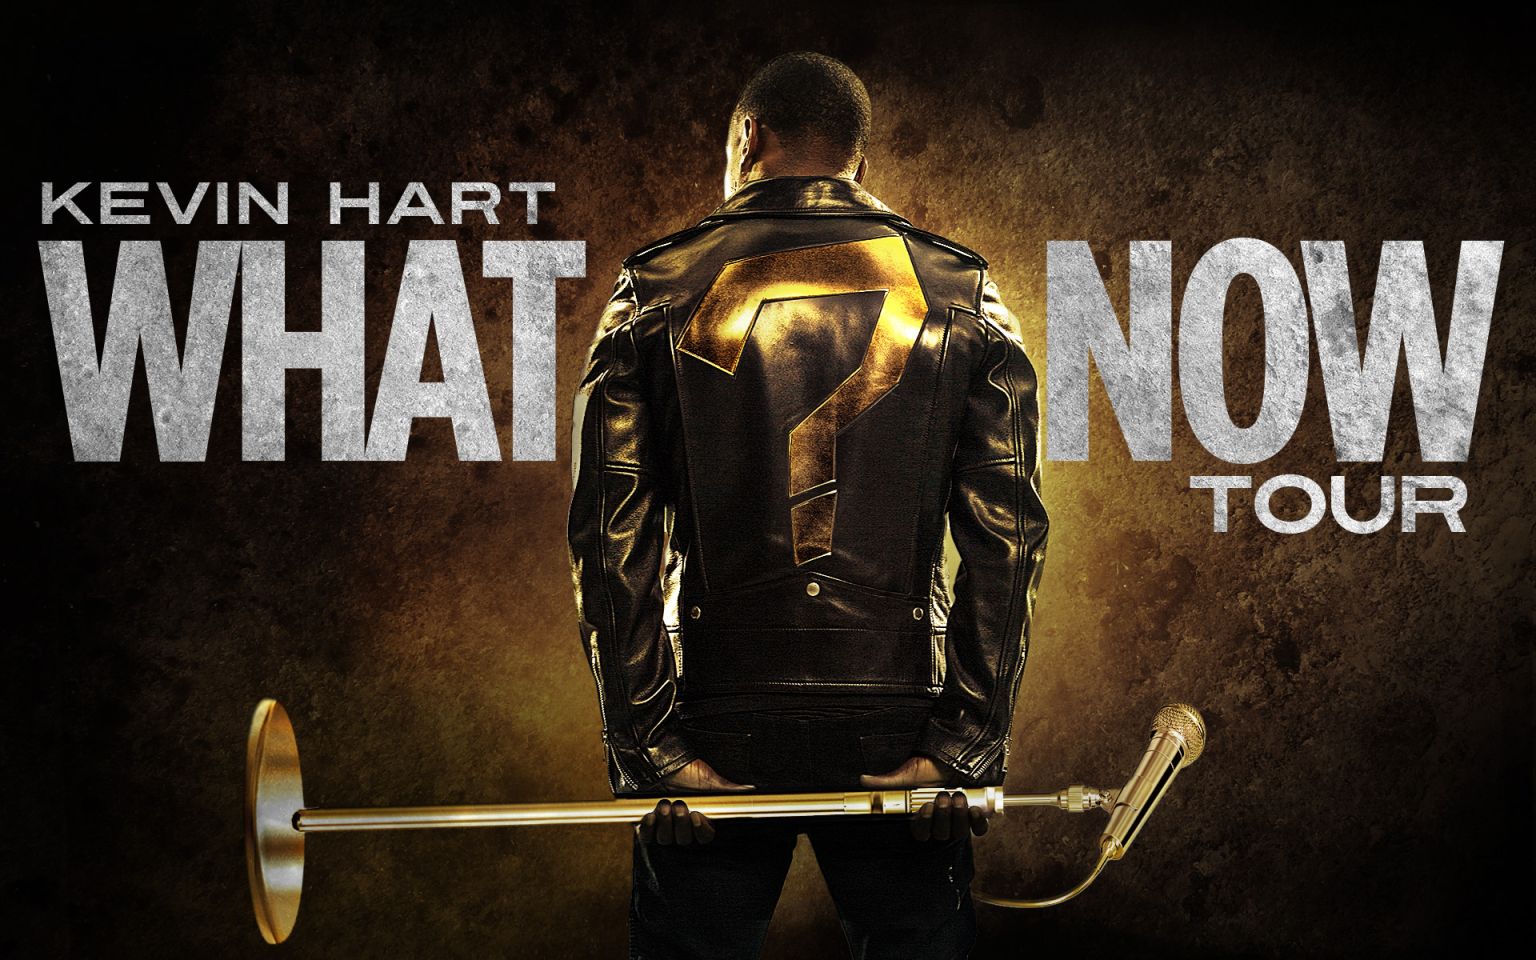 Kevin Hart “What Now” Tour Majic 102.1